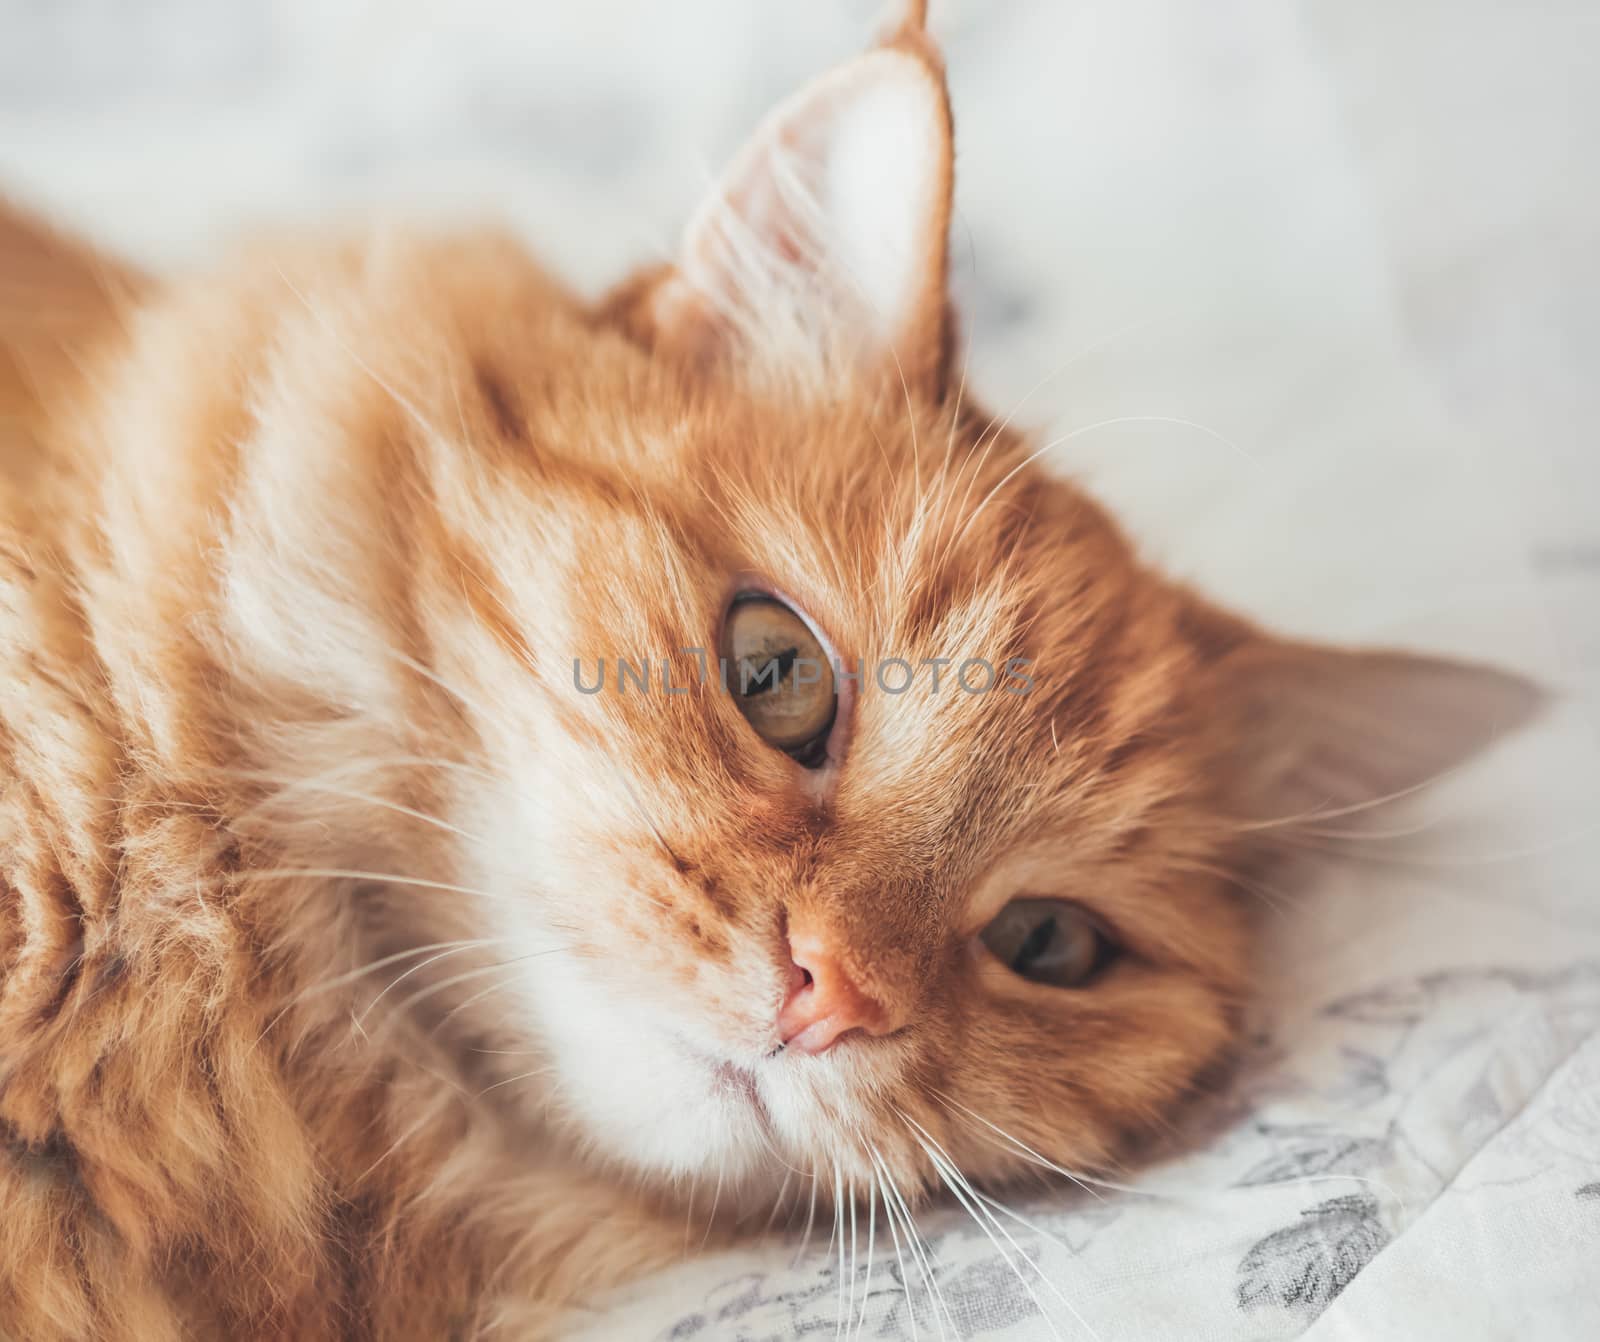 Close up portrait of cute ginger cat lying on bed. Curious and f by aksenovko